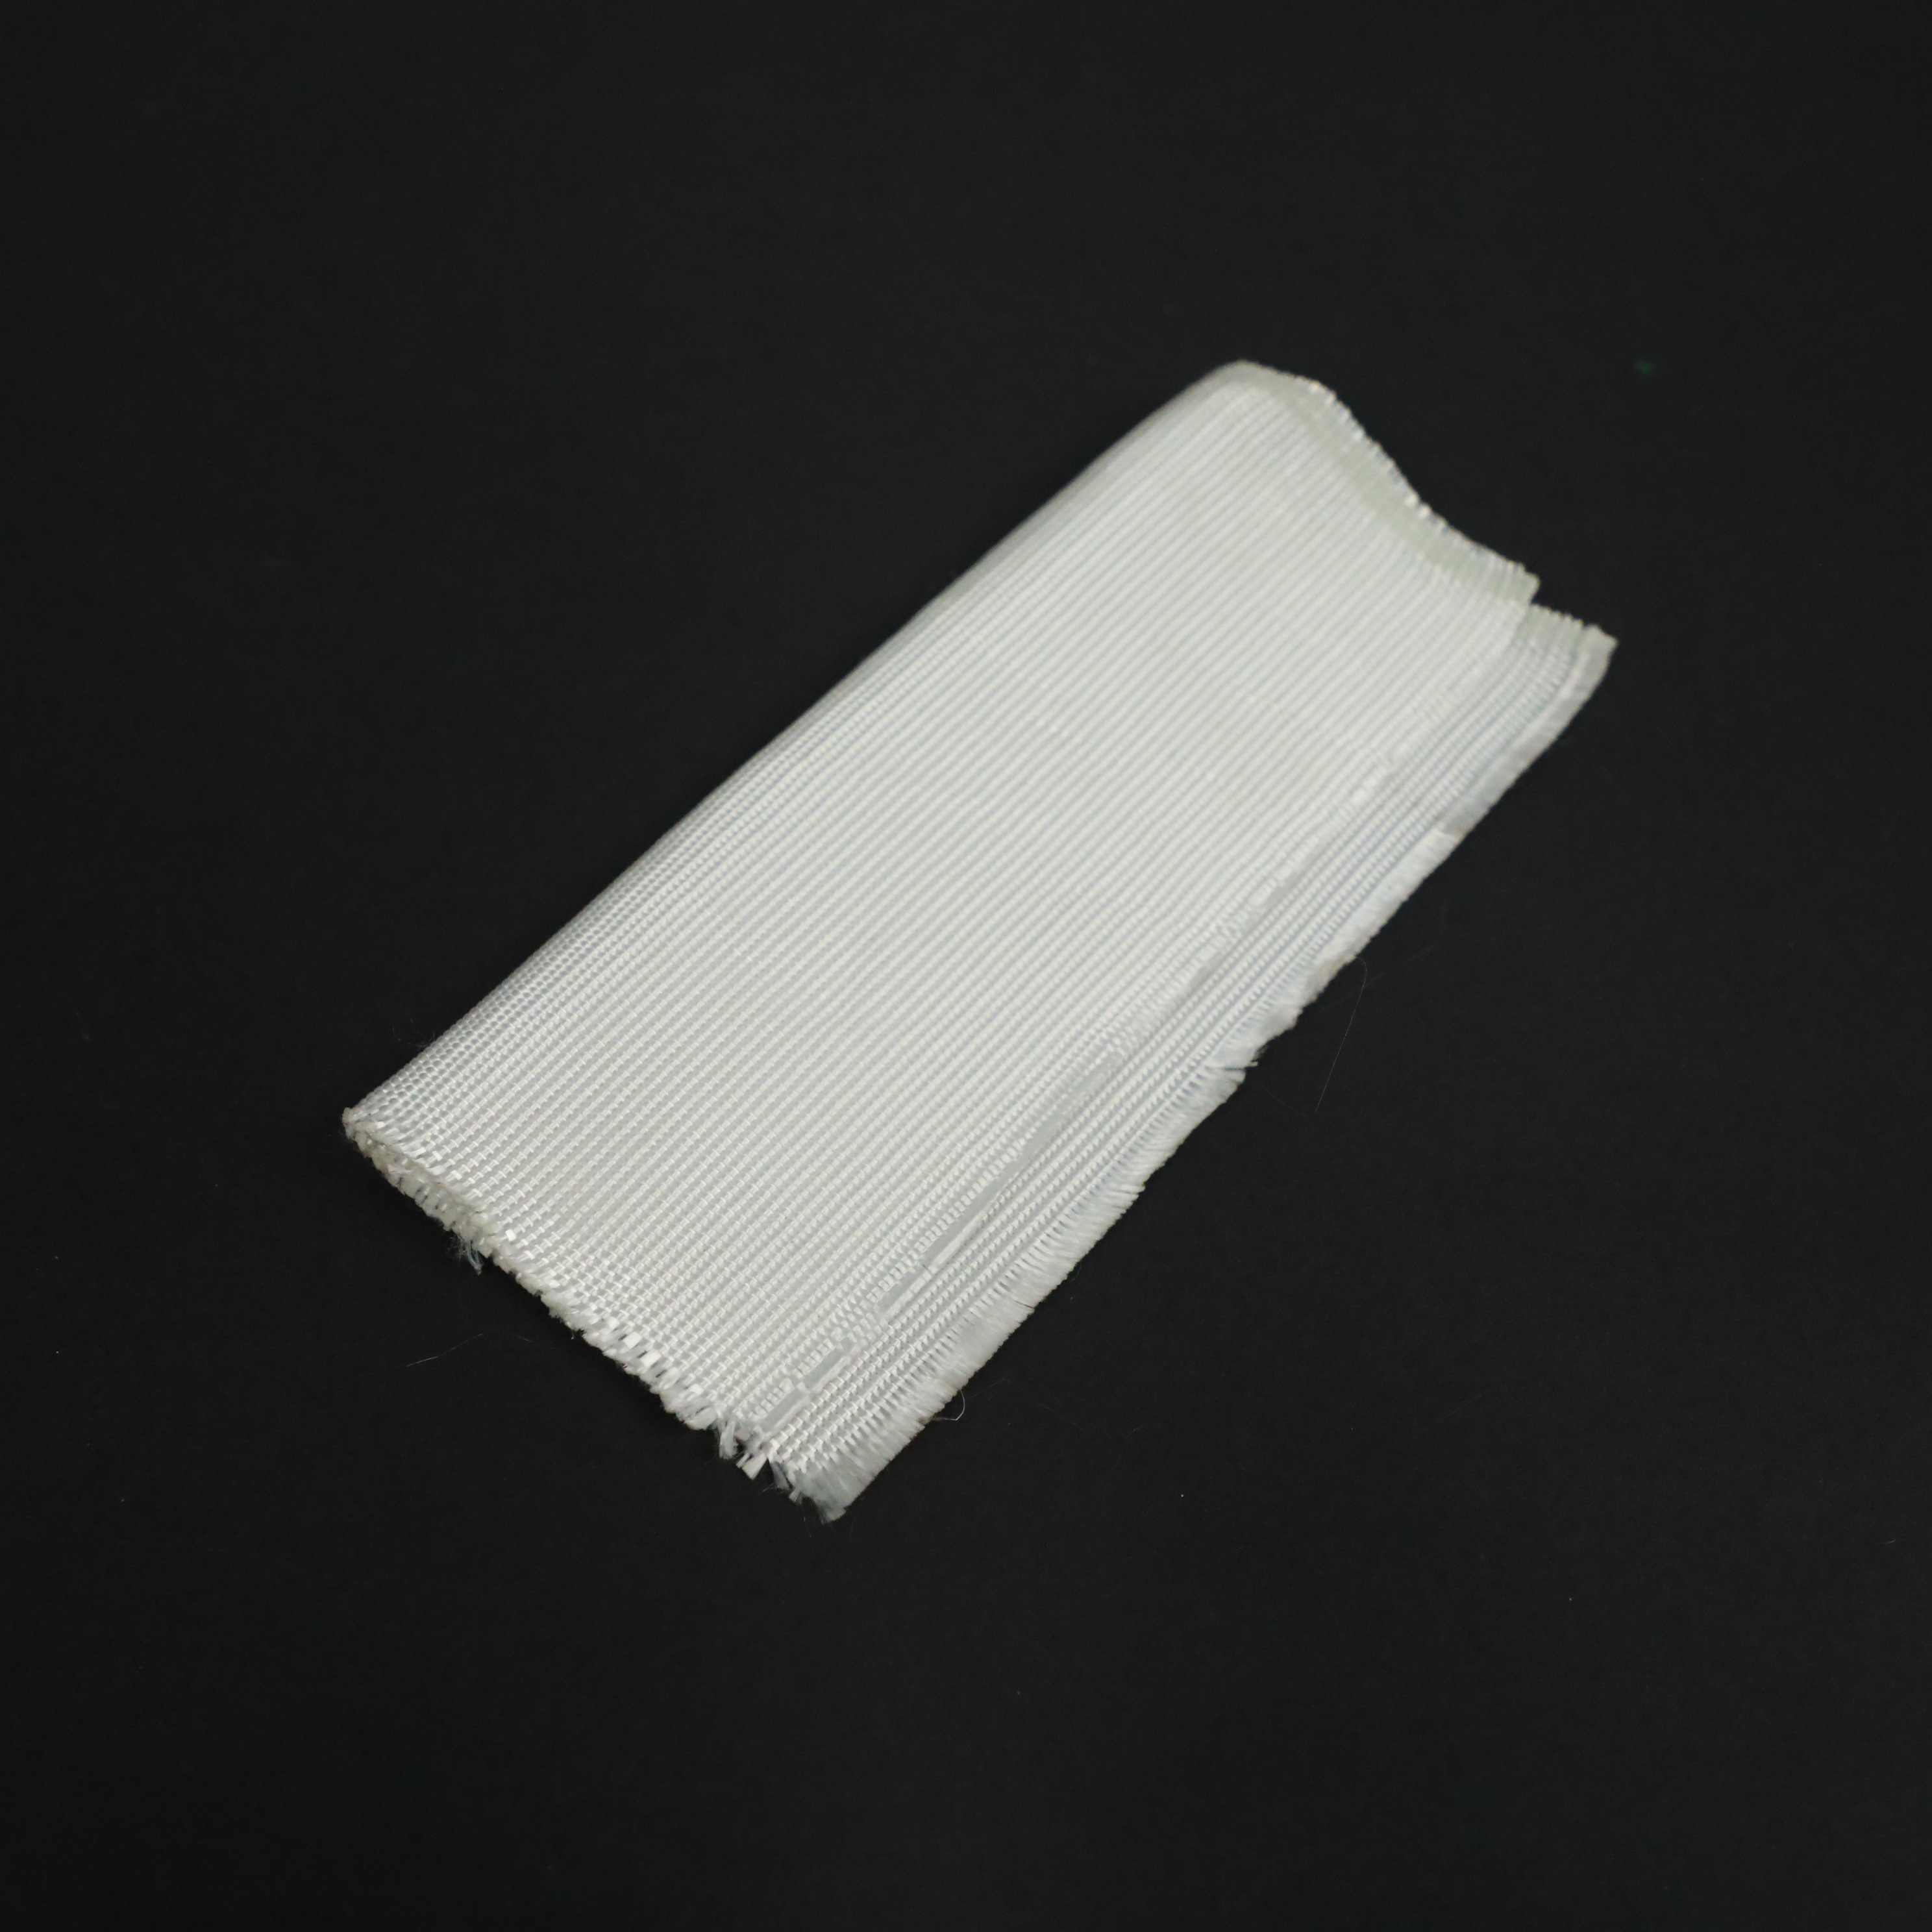 Fabric Geotextile Fabric for Driveway Woven Geotextile 